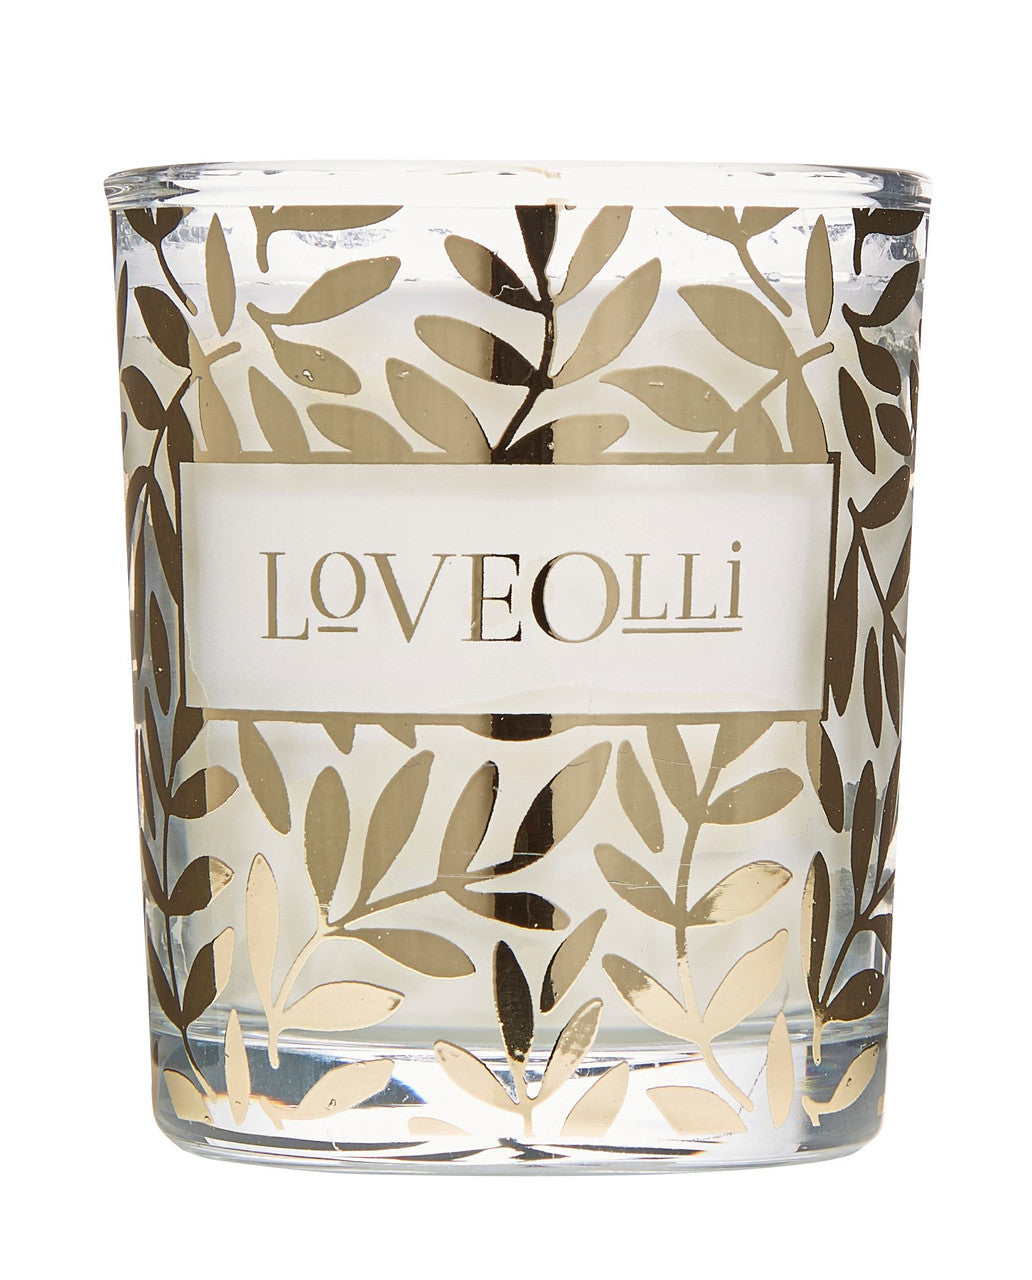 Love Olli Walk on the Wild Side scented votive candle. Hand poured in the UK.